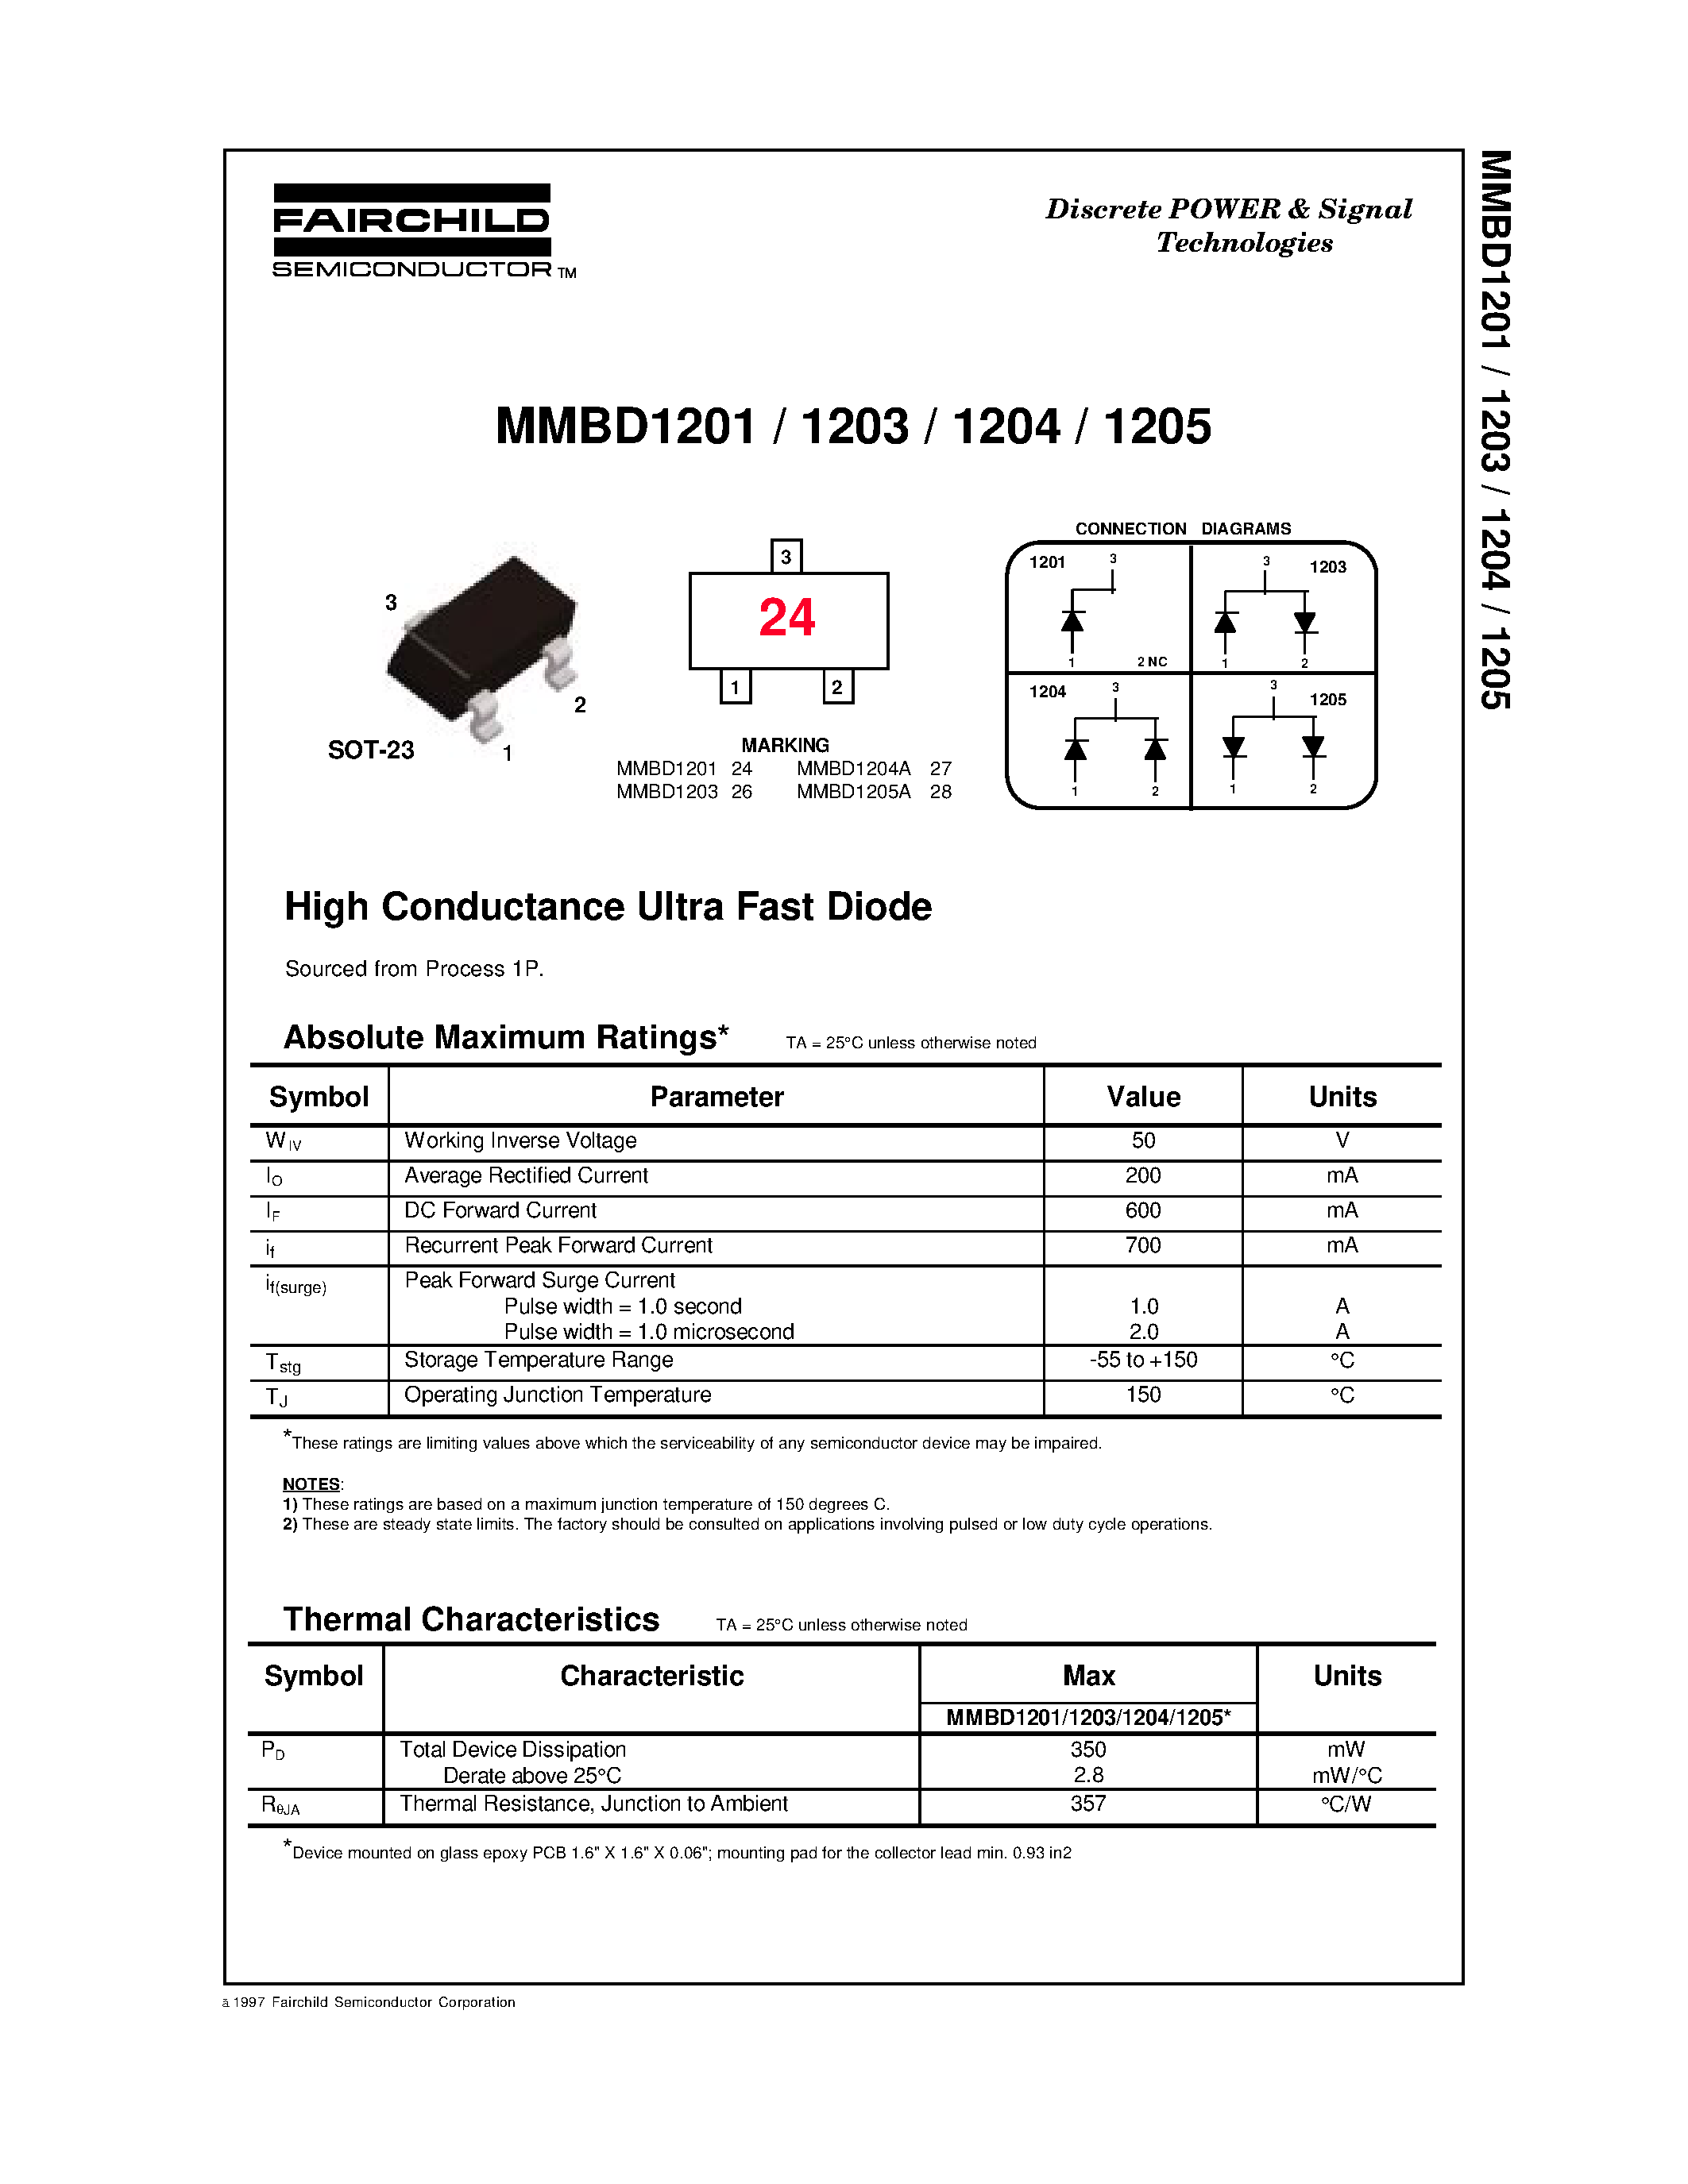 Datasheet MMBD1201 - High Conductance Ultra Fast Diode page 1